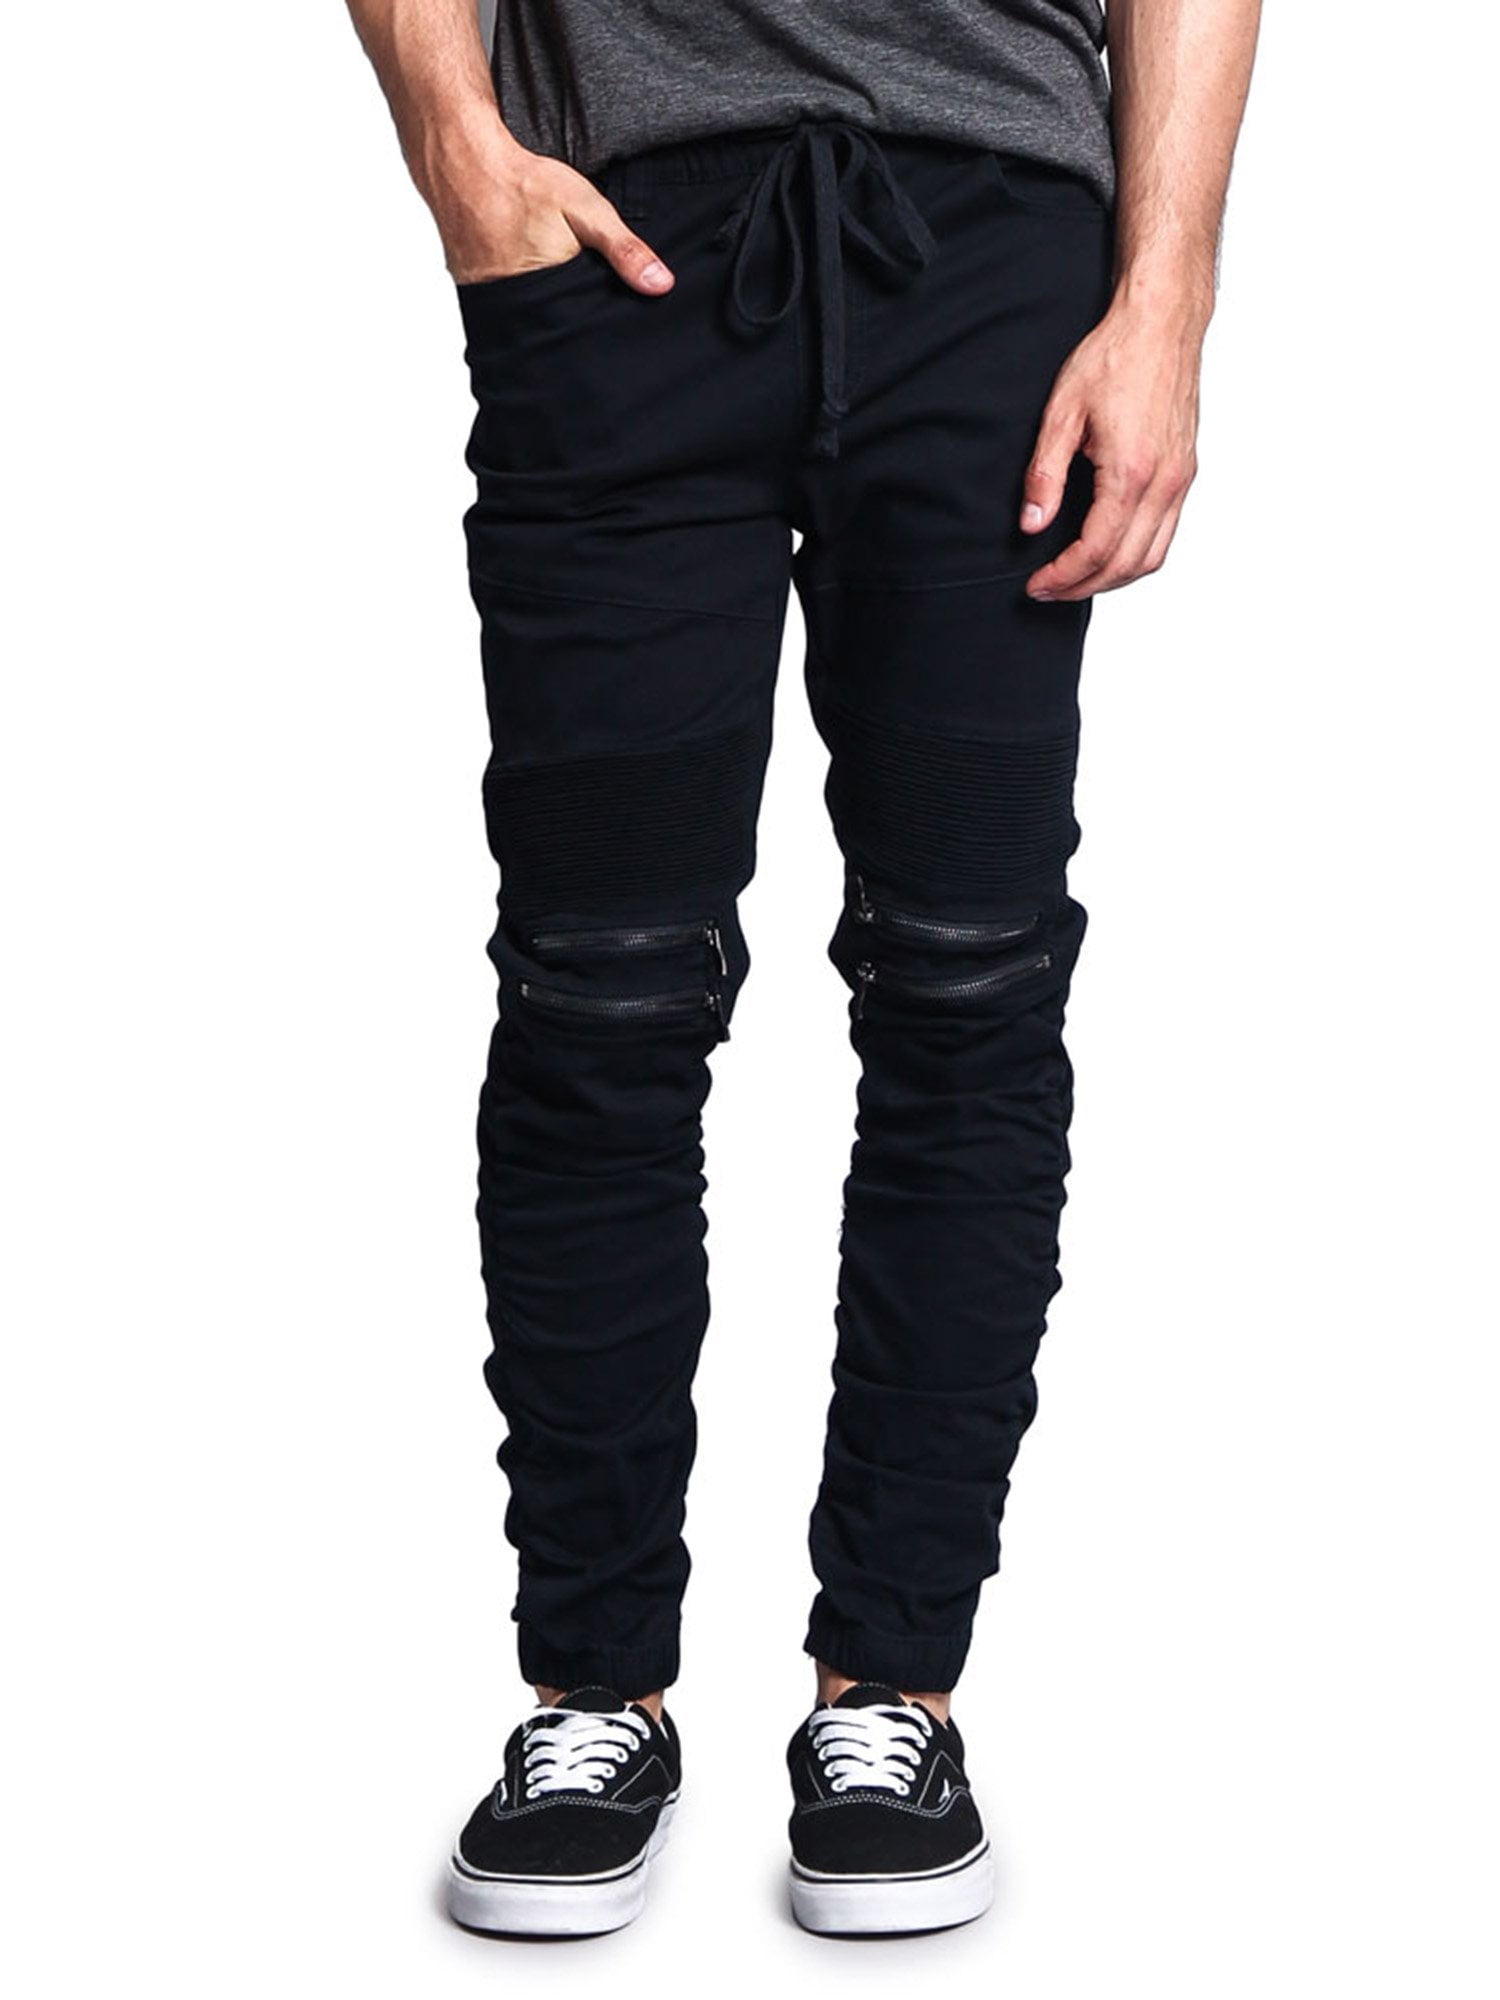 Cuffed with Pockets Lacoste Sport Mens Jersey Jog Pants in Black Cotton